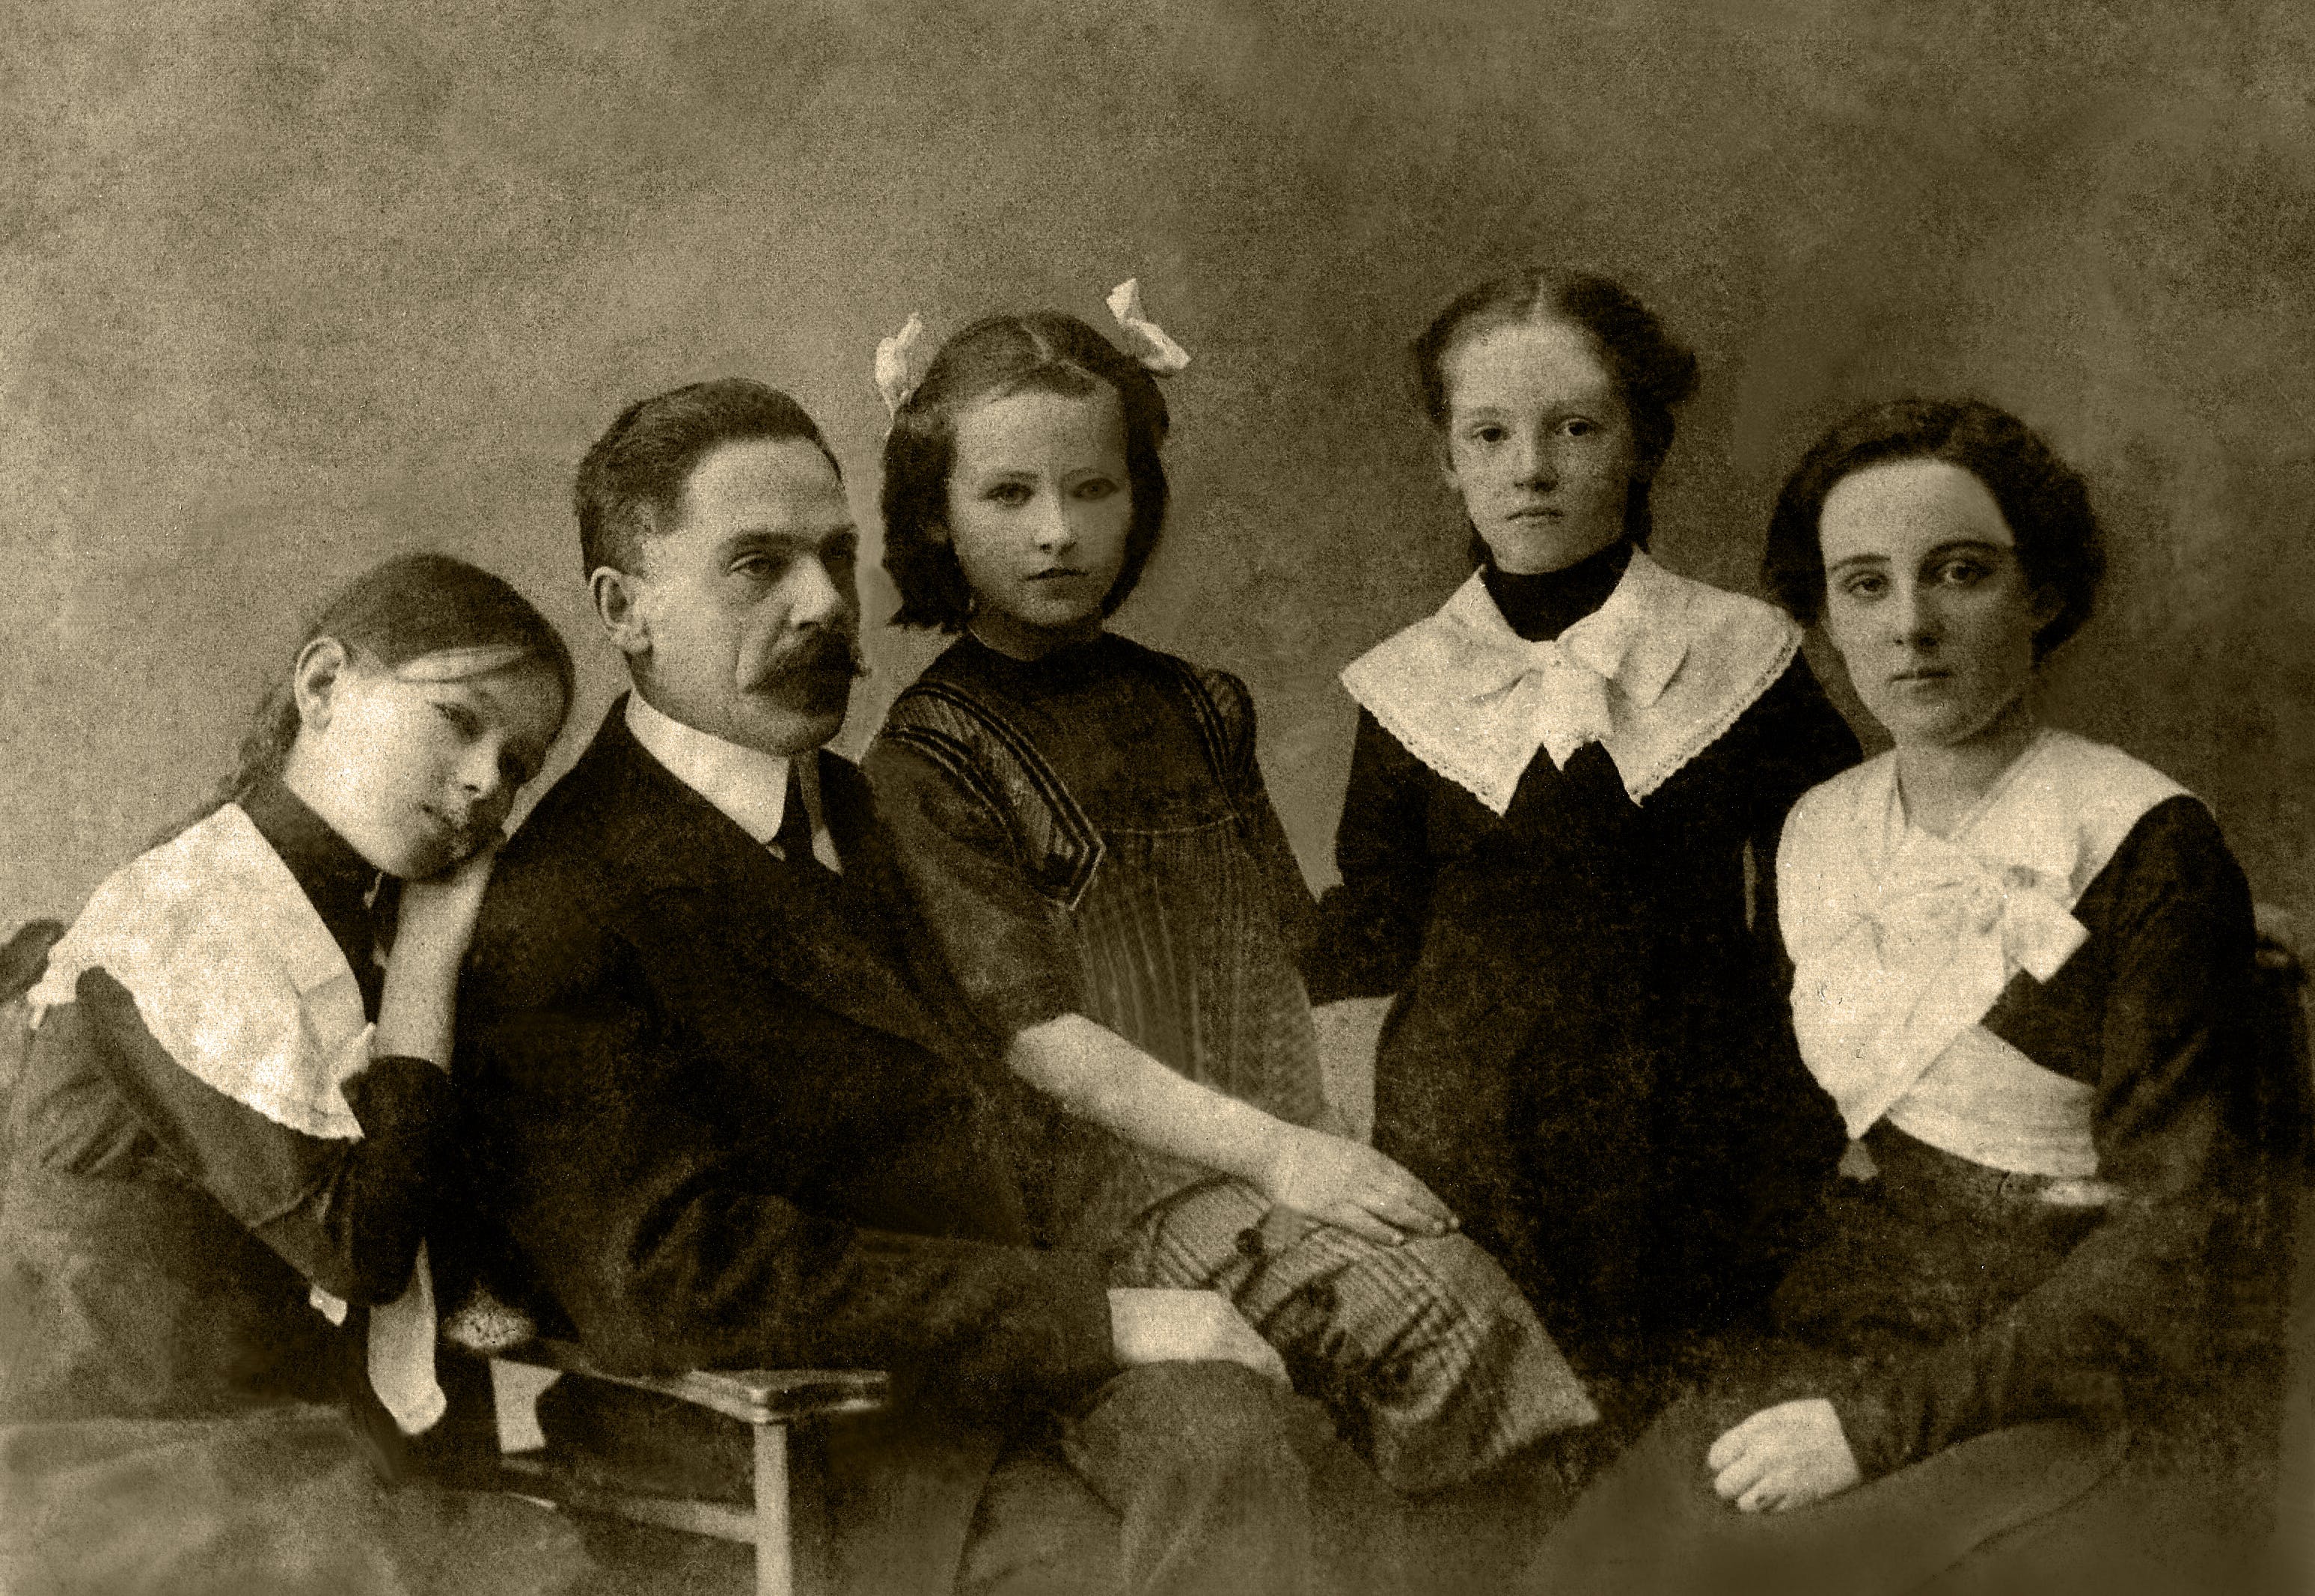 A family of 5 posing for a photograph.